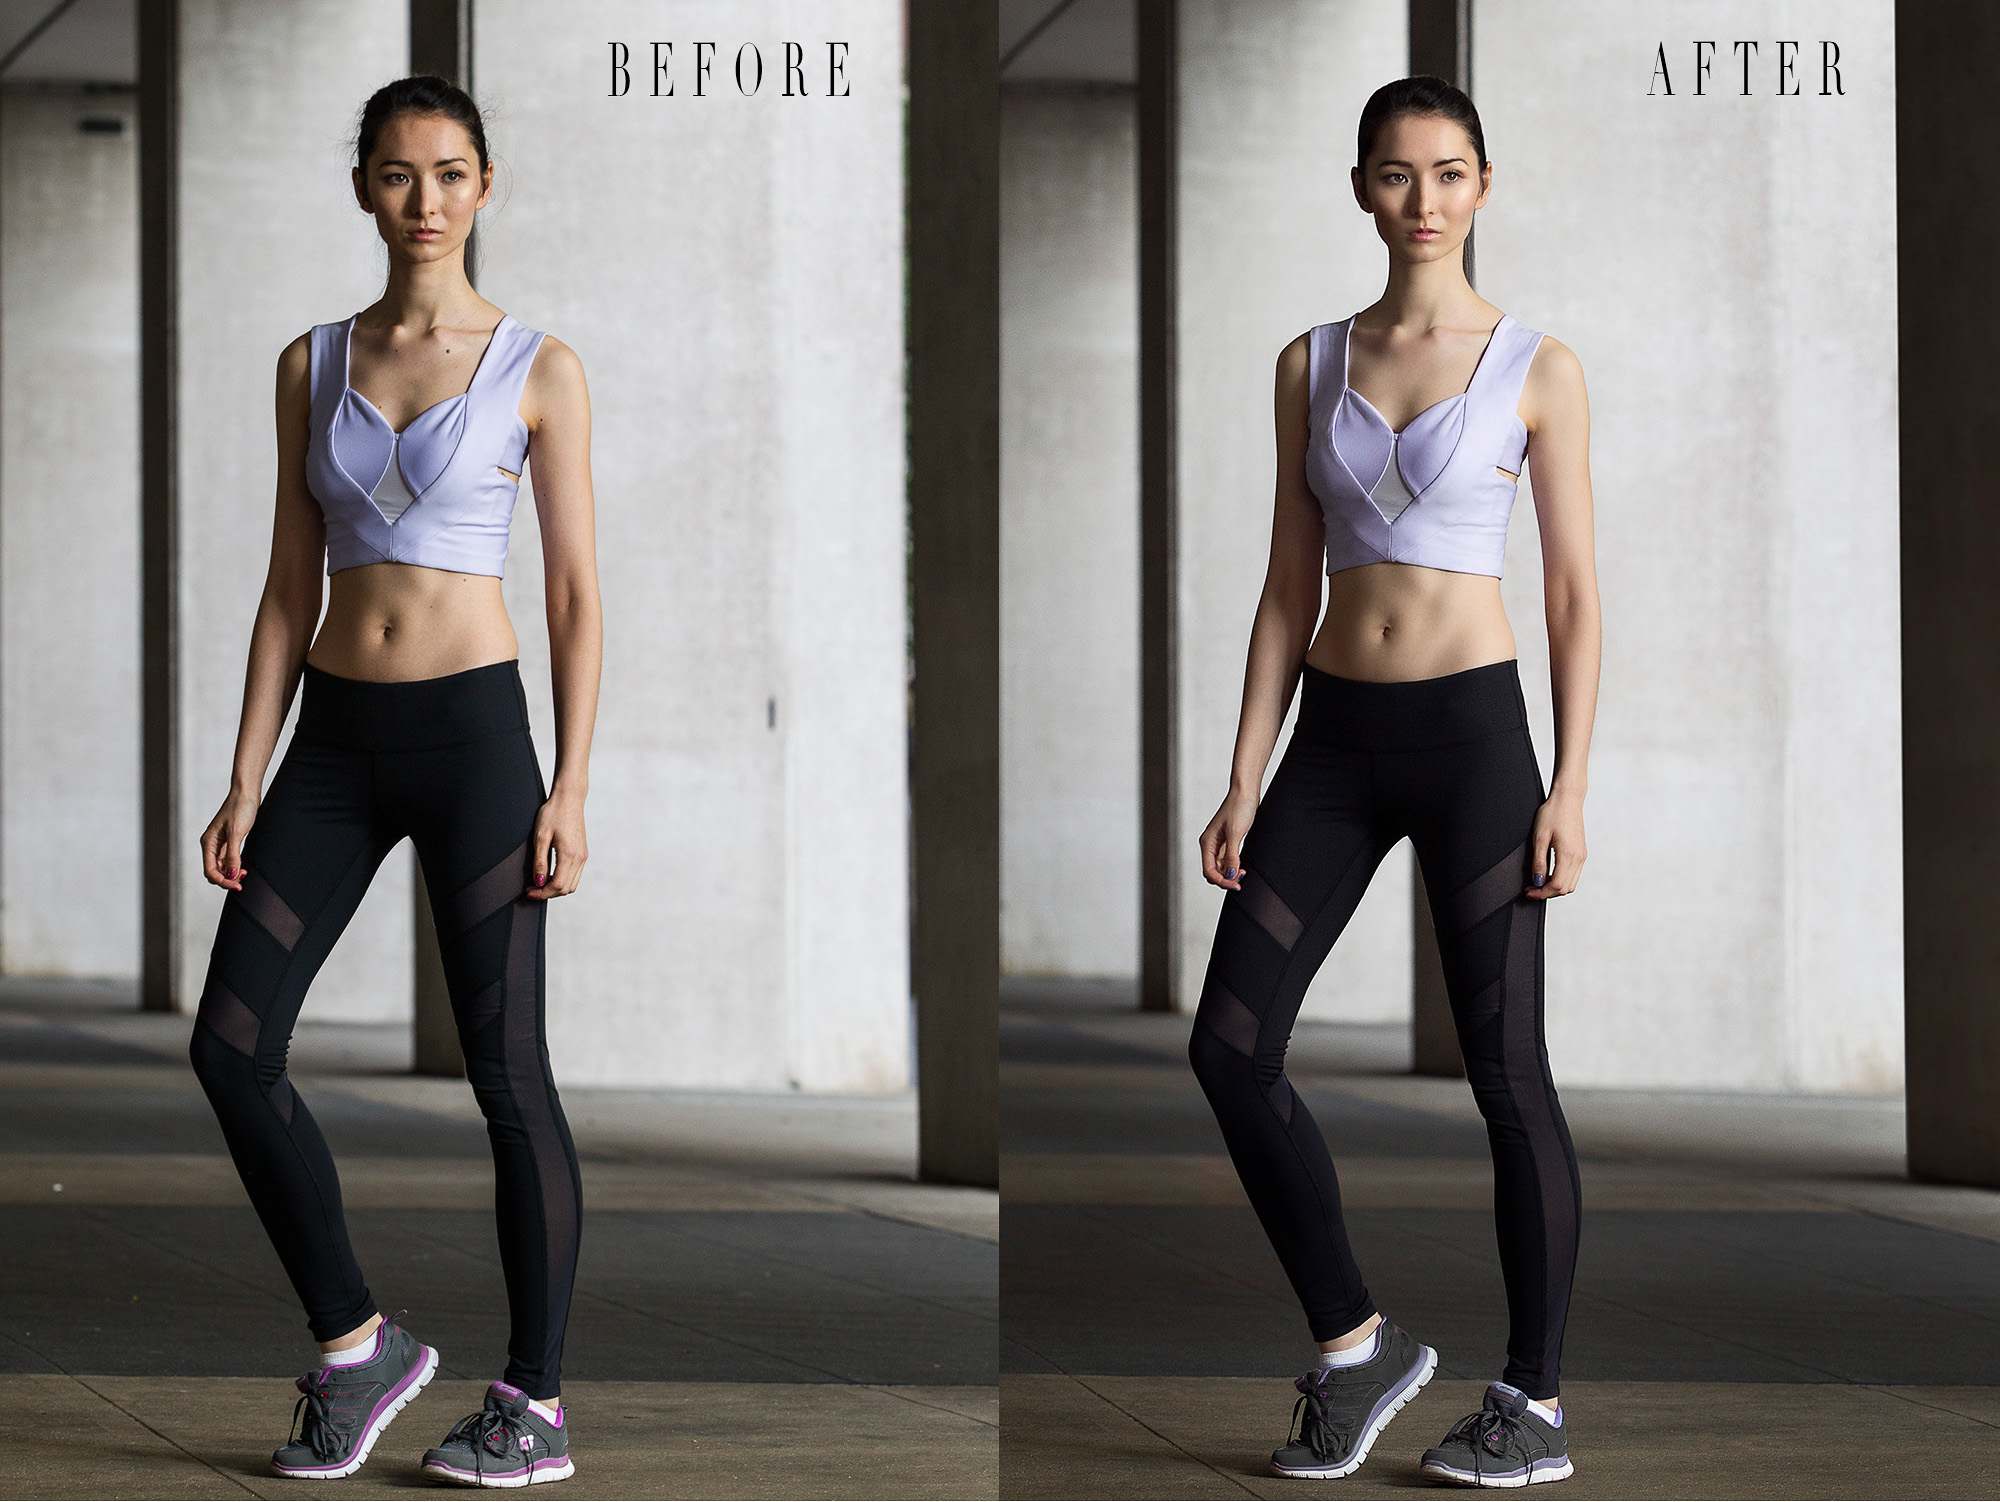 Aine Activewear 041-AFTER-Edit